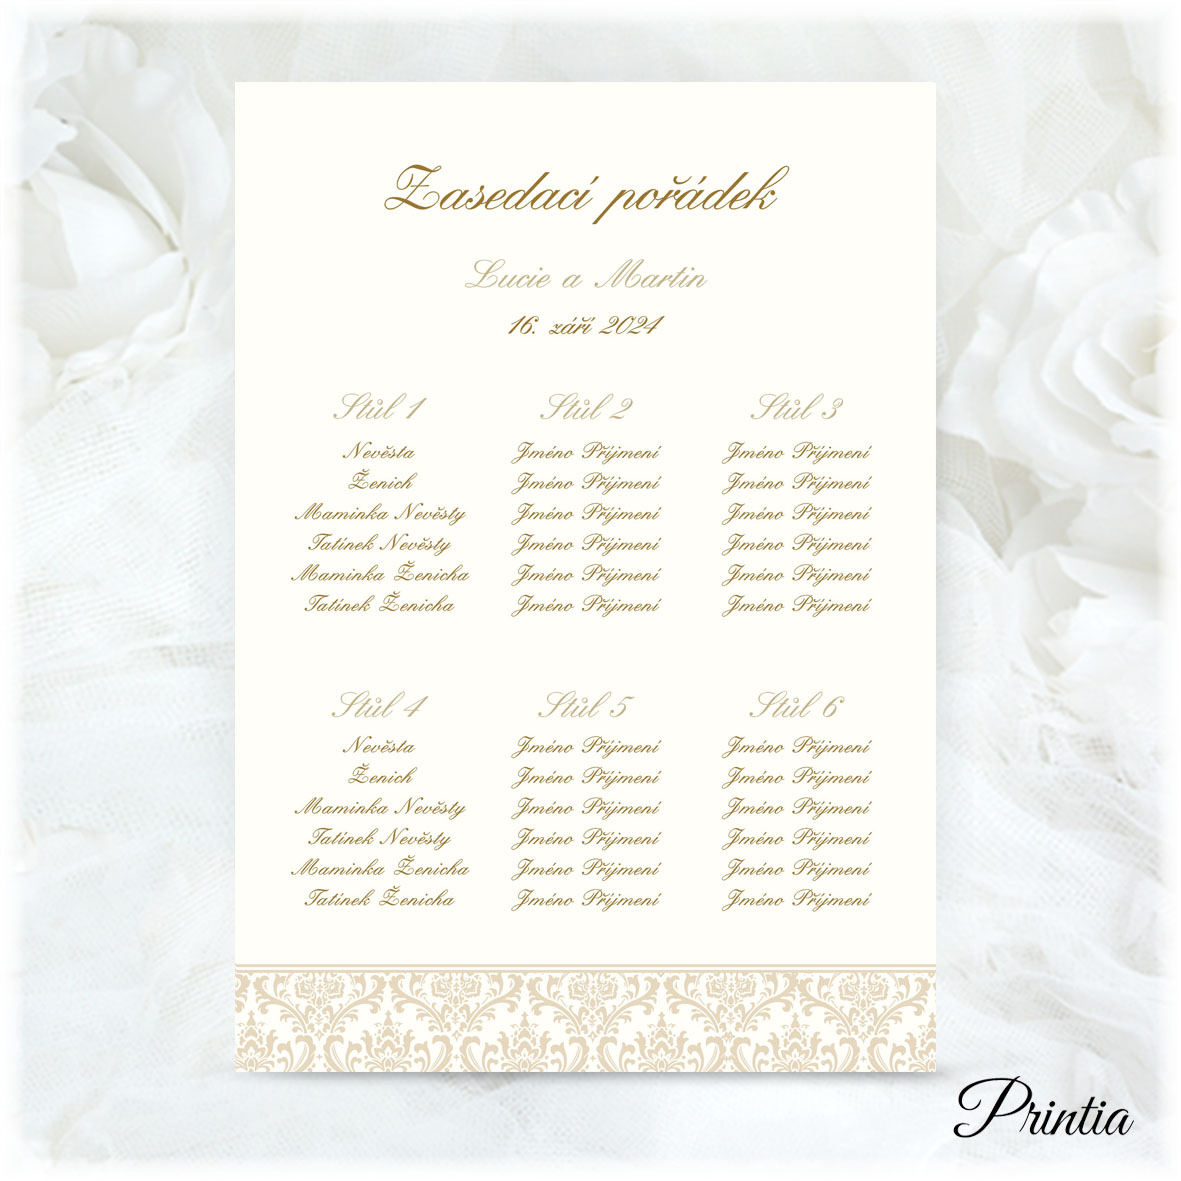 Wedding seating order with chateau ornament